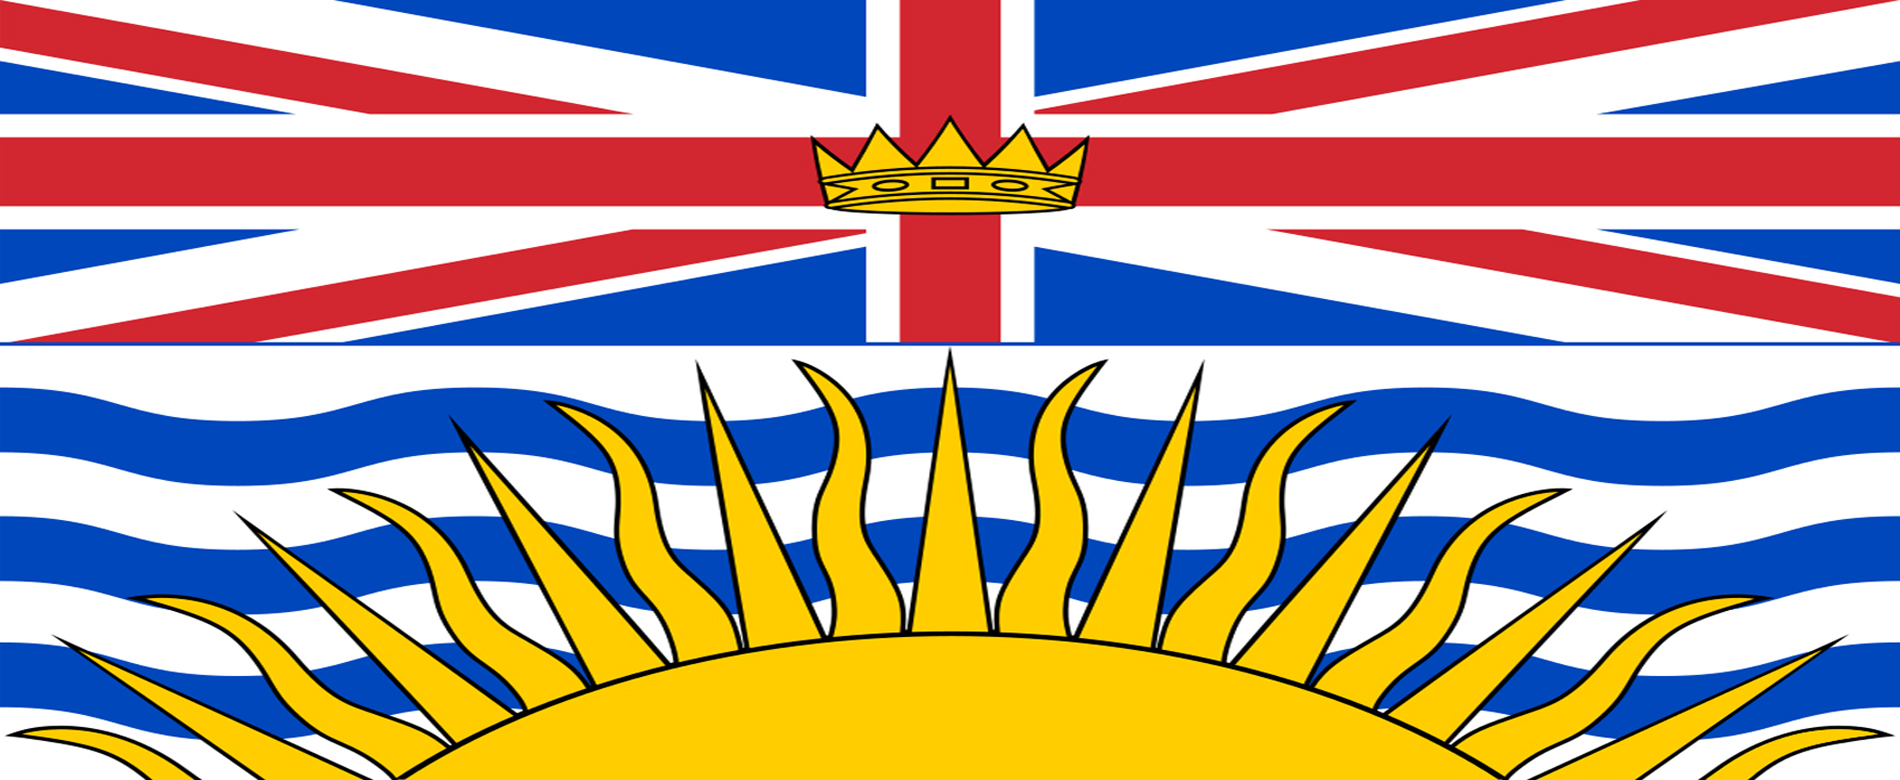 We are very excited to relaunch our services in the Capital Regional District of Victoria, British Columbia.